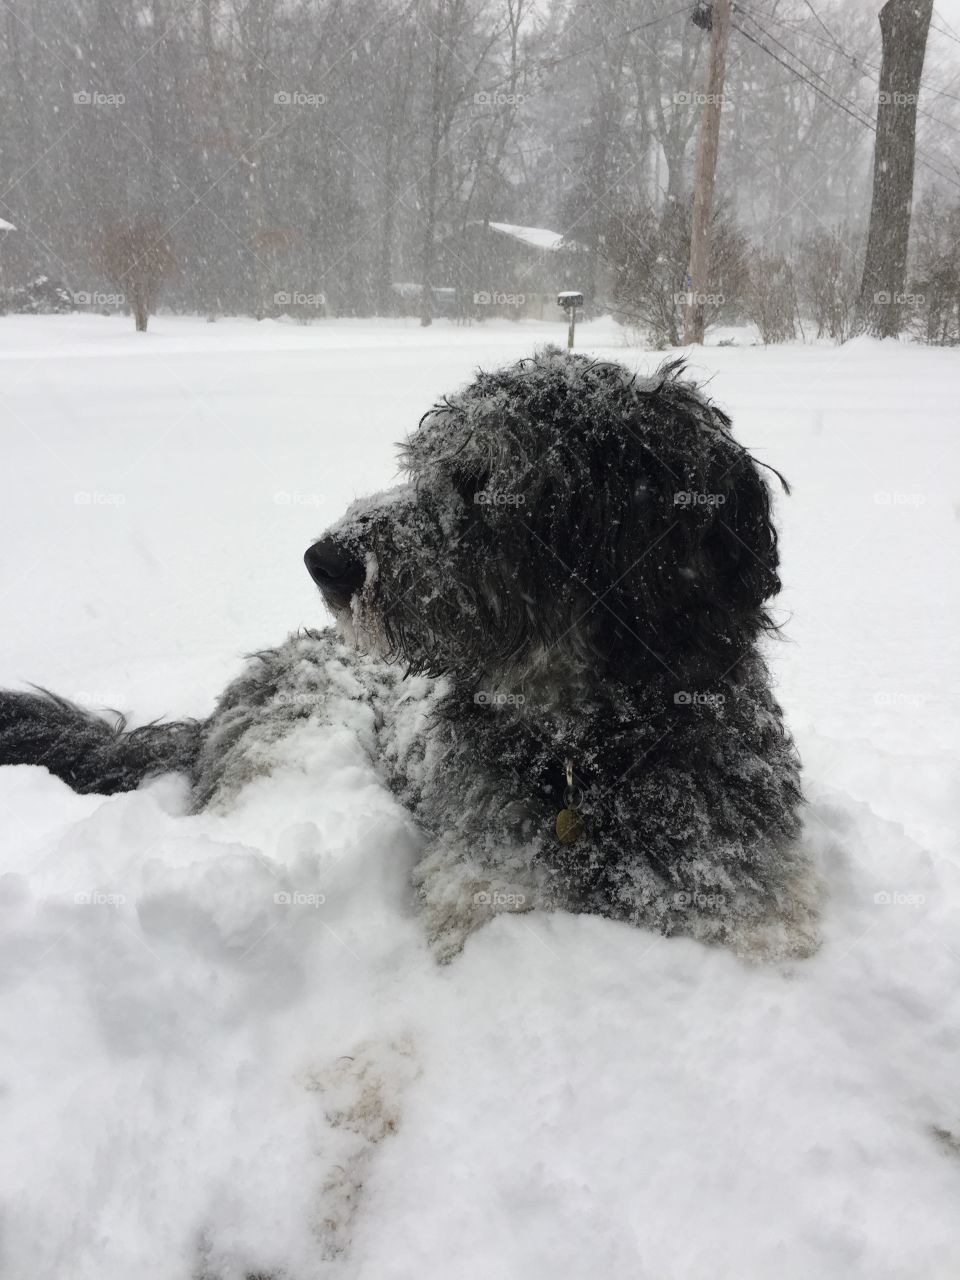 Pup in the snow